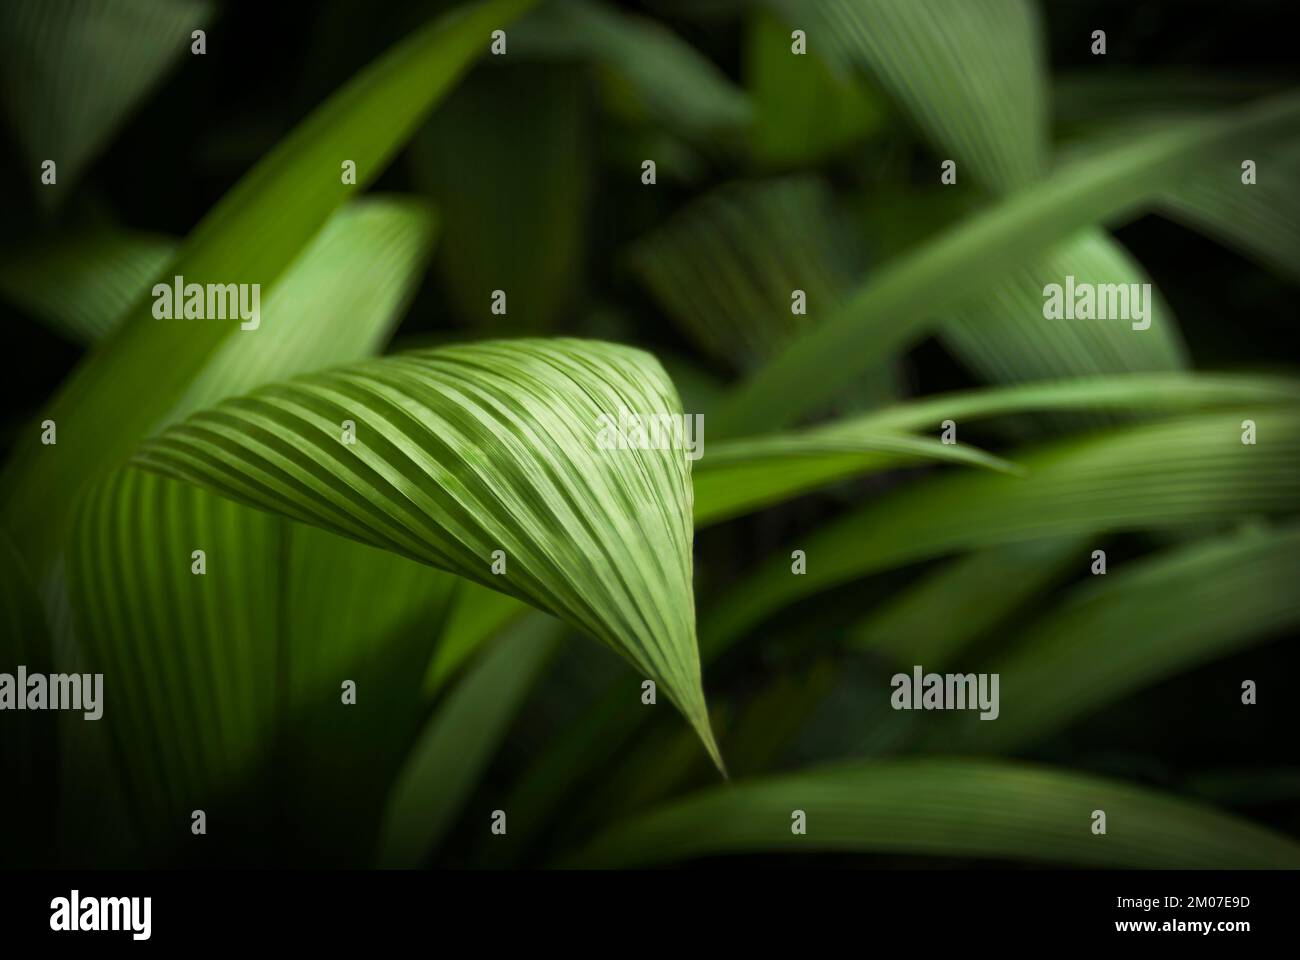 The texture of a beautiful green leaf of molineria capitulata hanging forward with the background of other leaves blurred and black Stock Photo